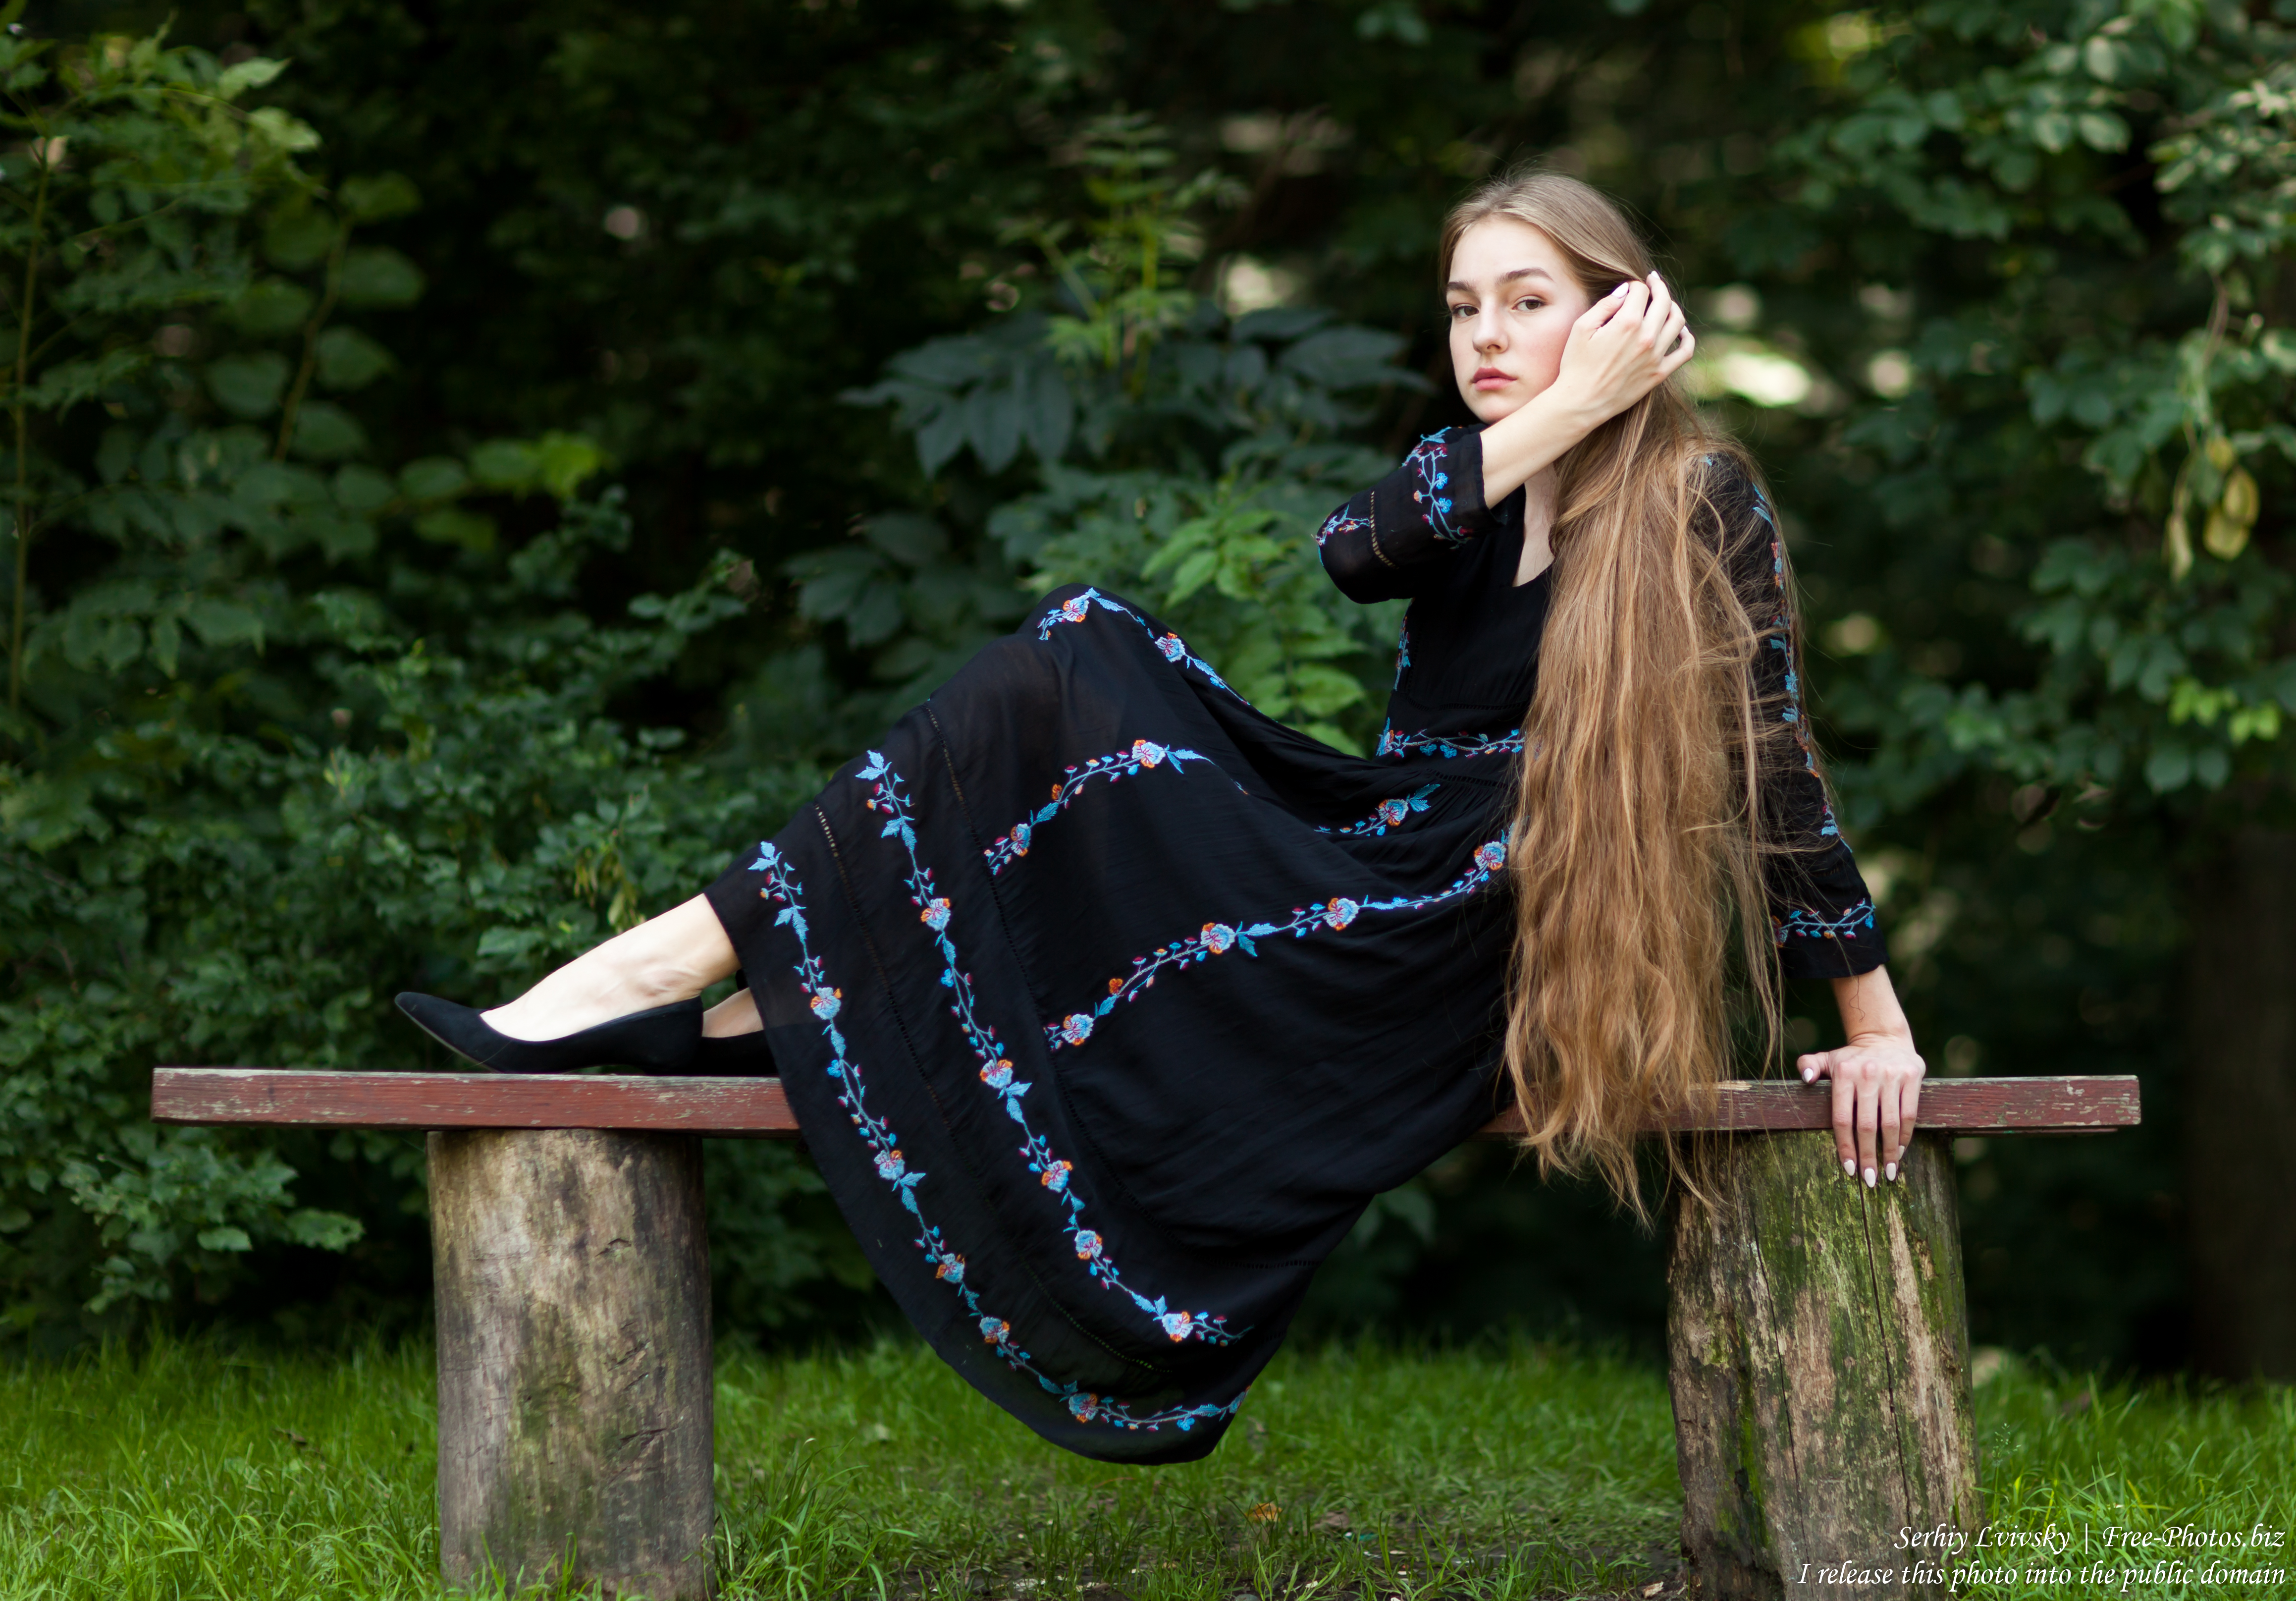 Justyna - a 16-year-old fair-haired girl photographed in June 2018 by Serhiy Lvivsky, picture 19